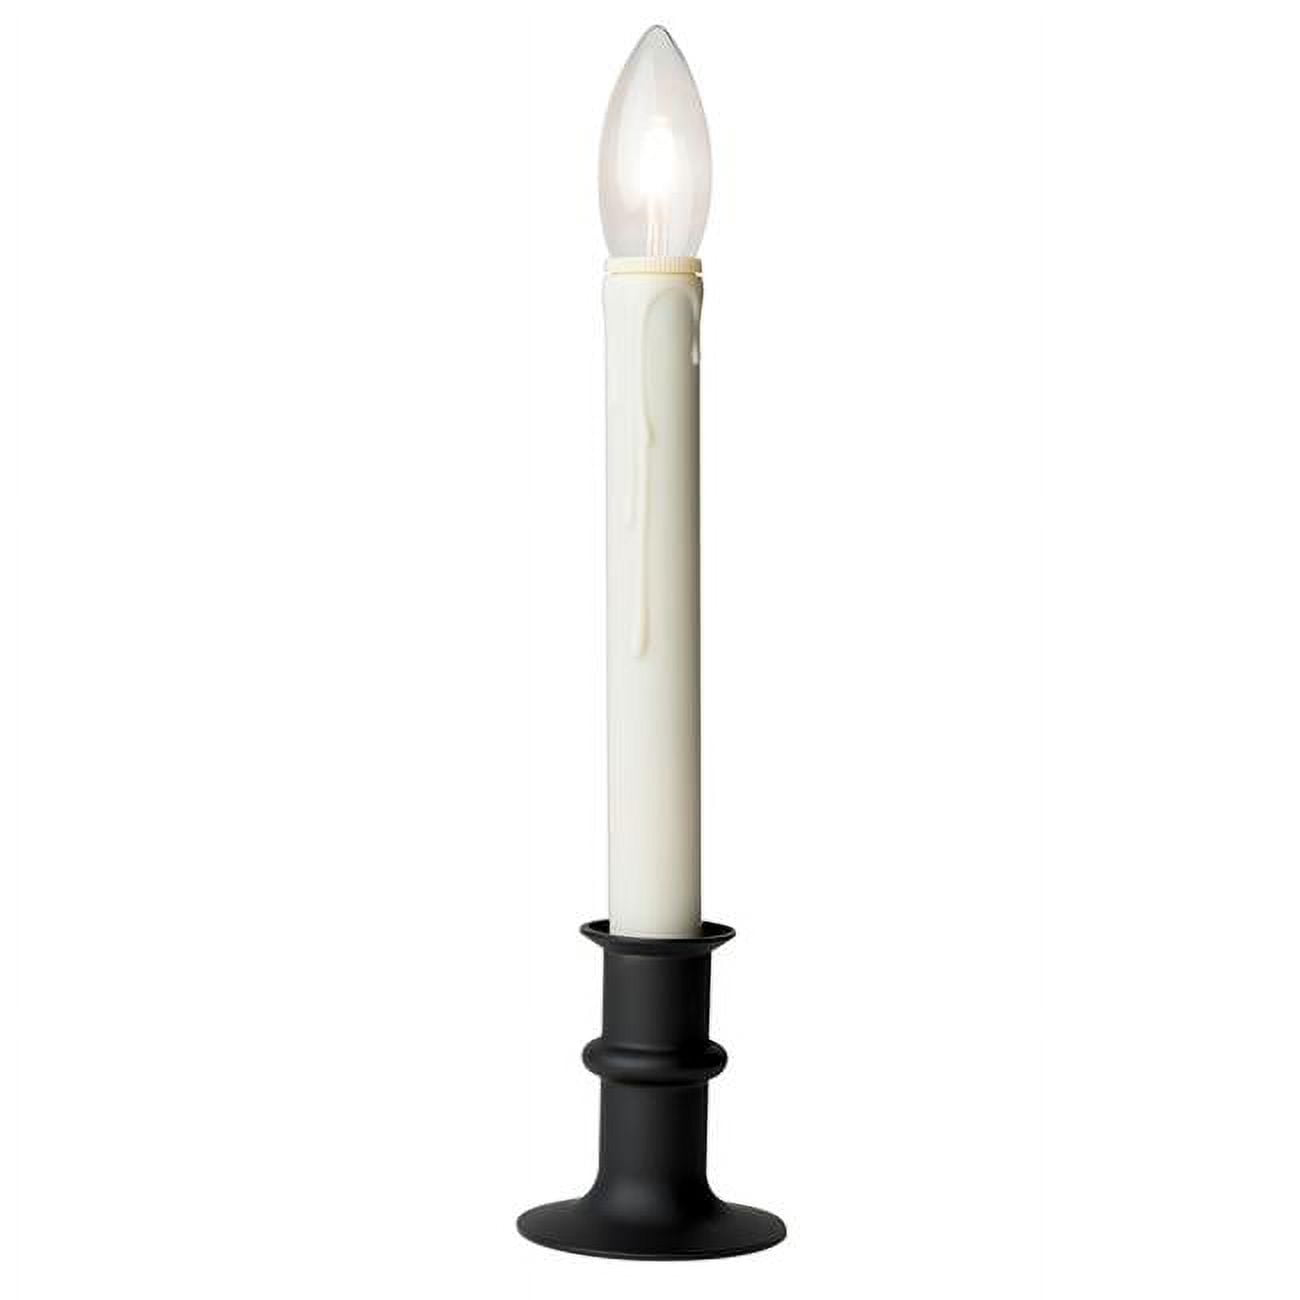 9017069 Battery Operated Taper Flameless Flickering Candle, Ivory - Black Onyx